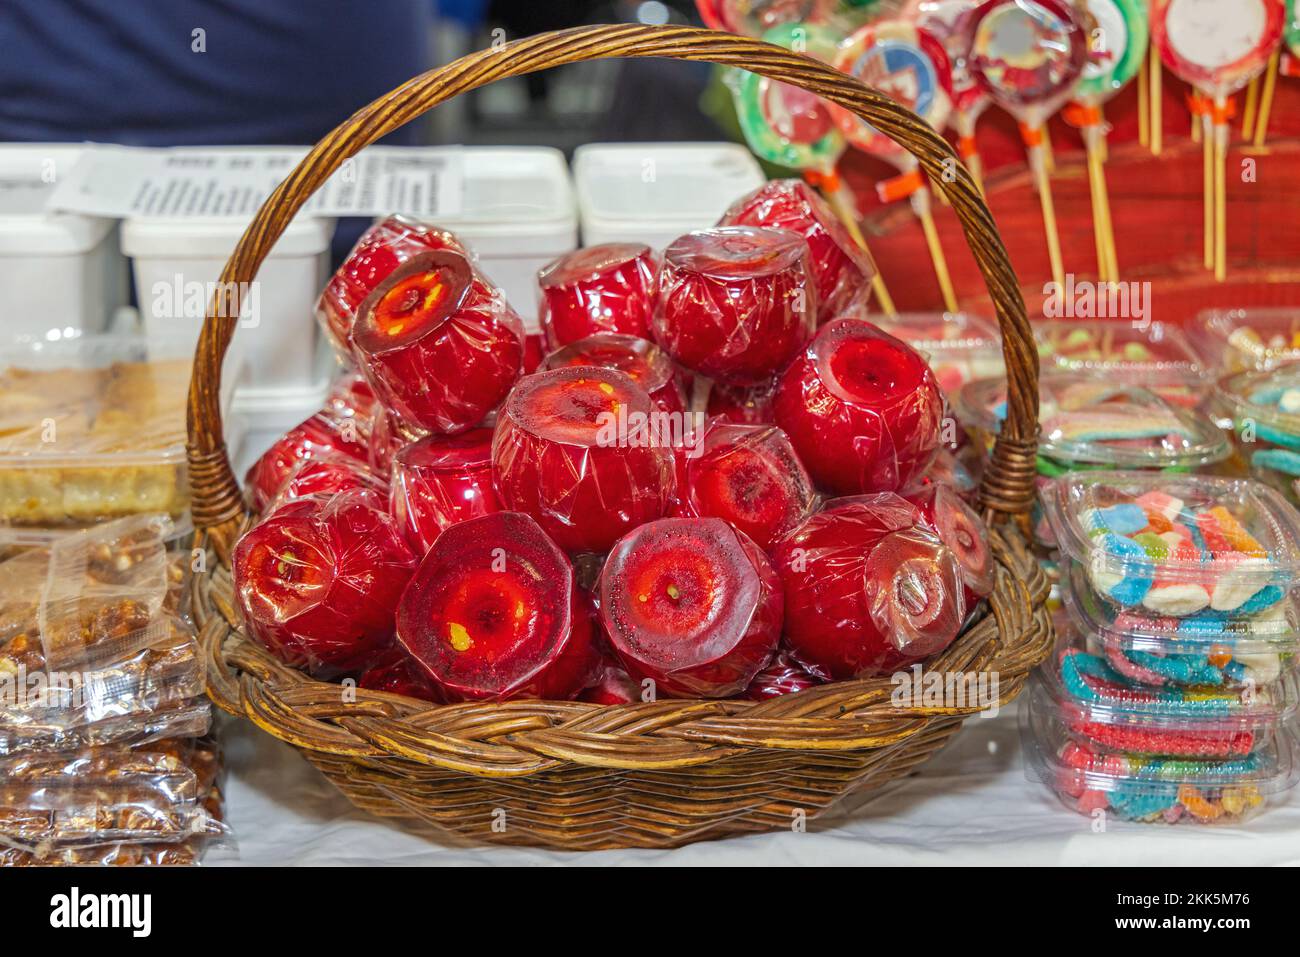 Whole Red Candy Apples Covered in Sugar Coating in Basket at Fall Festival Stock Photo